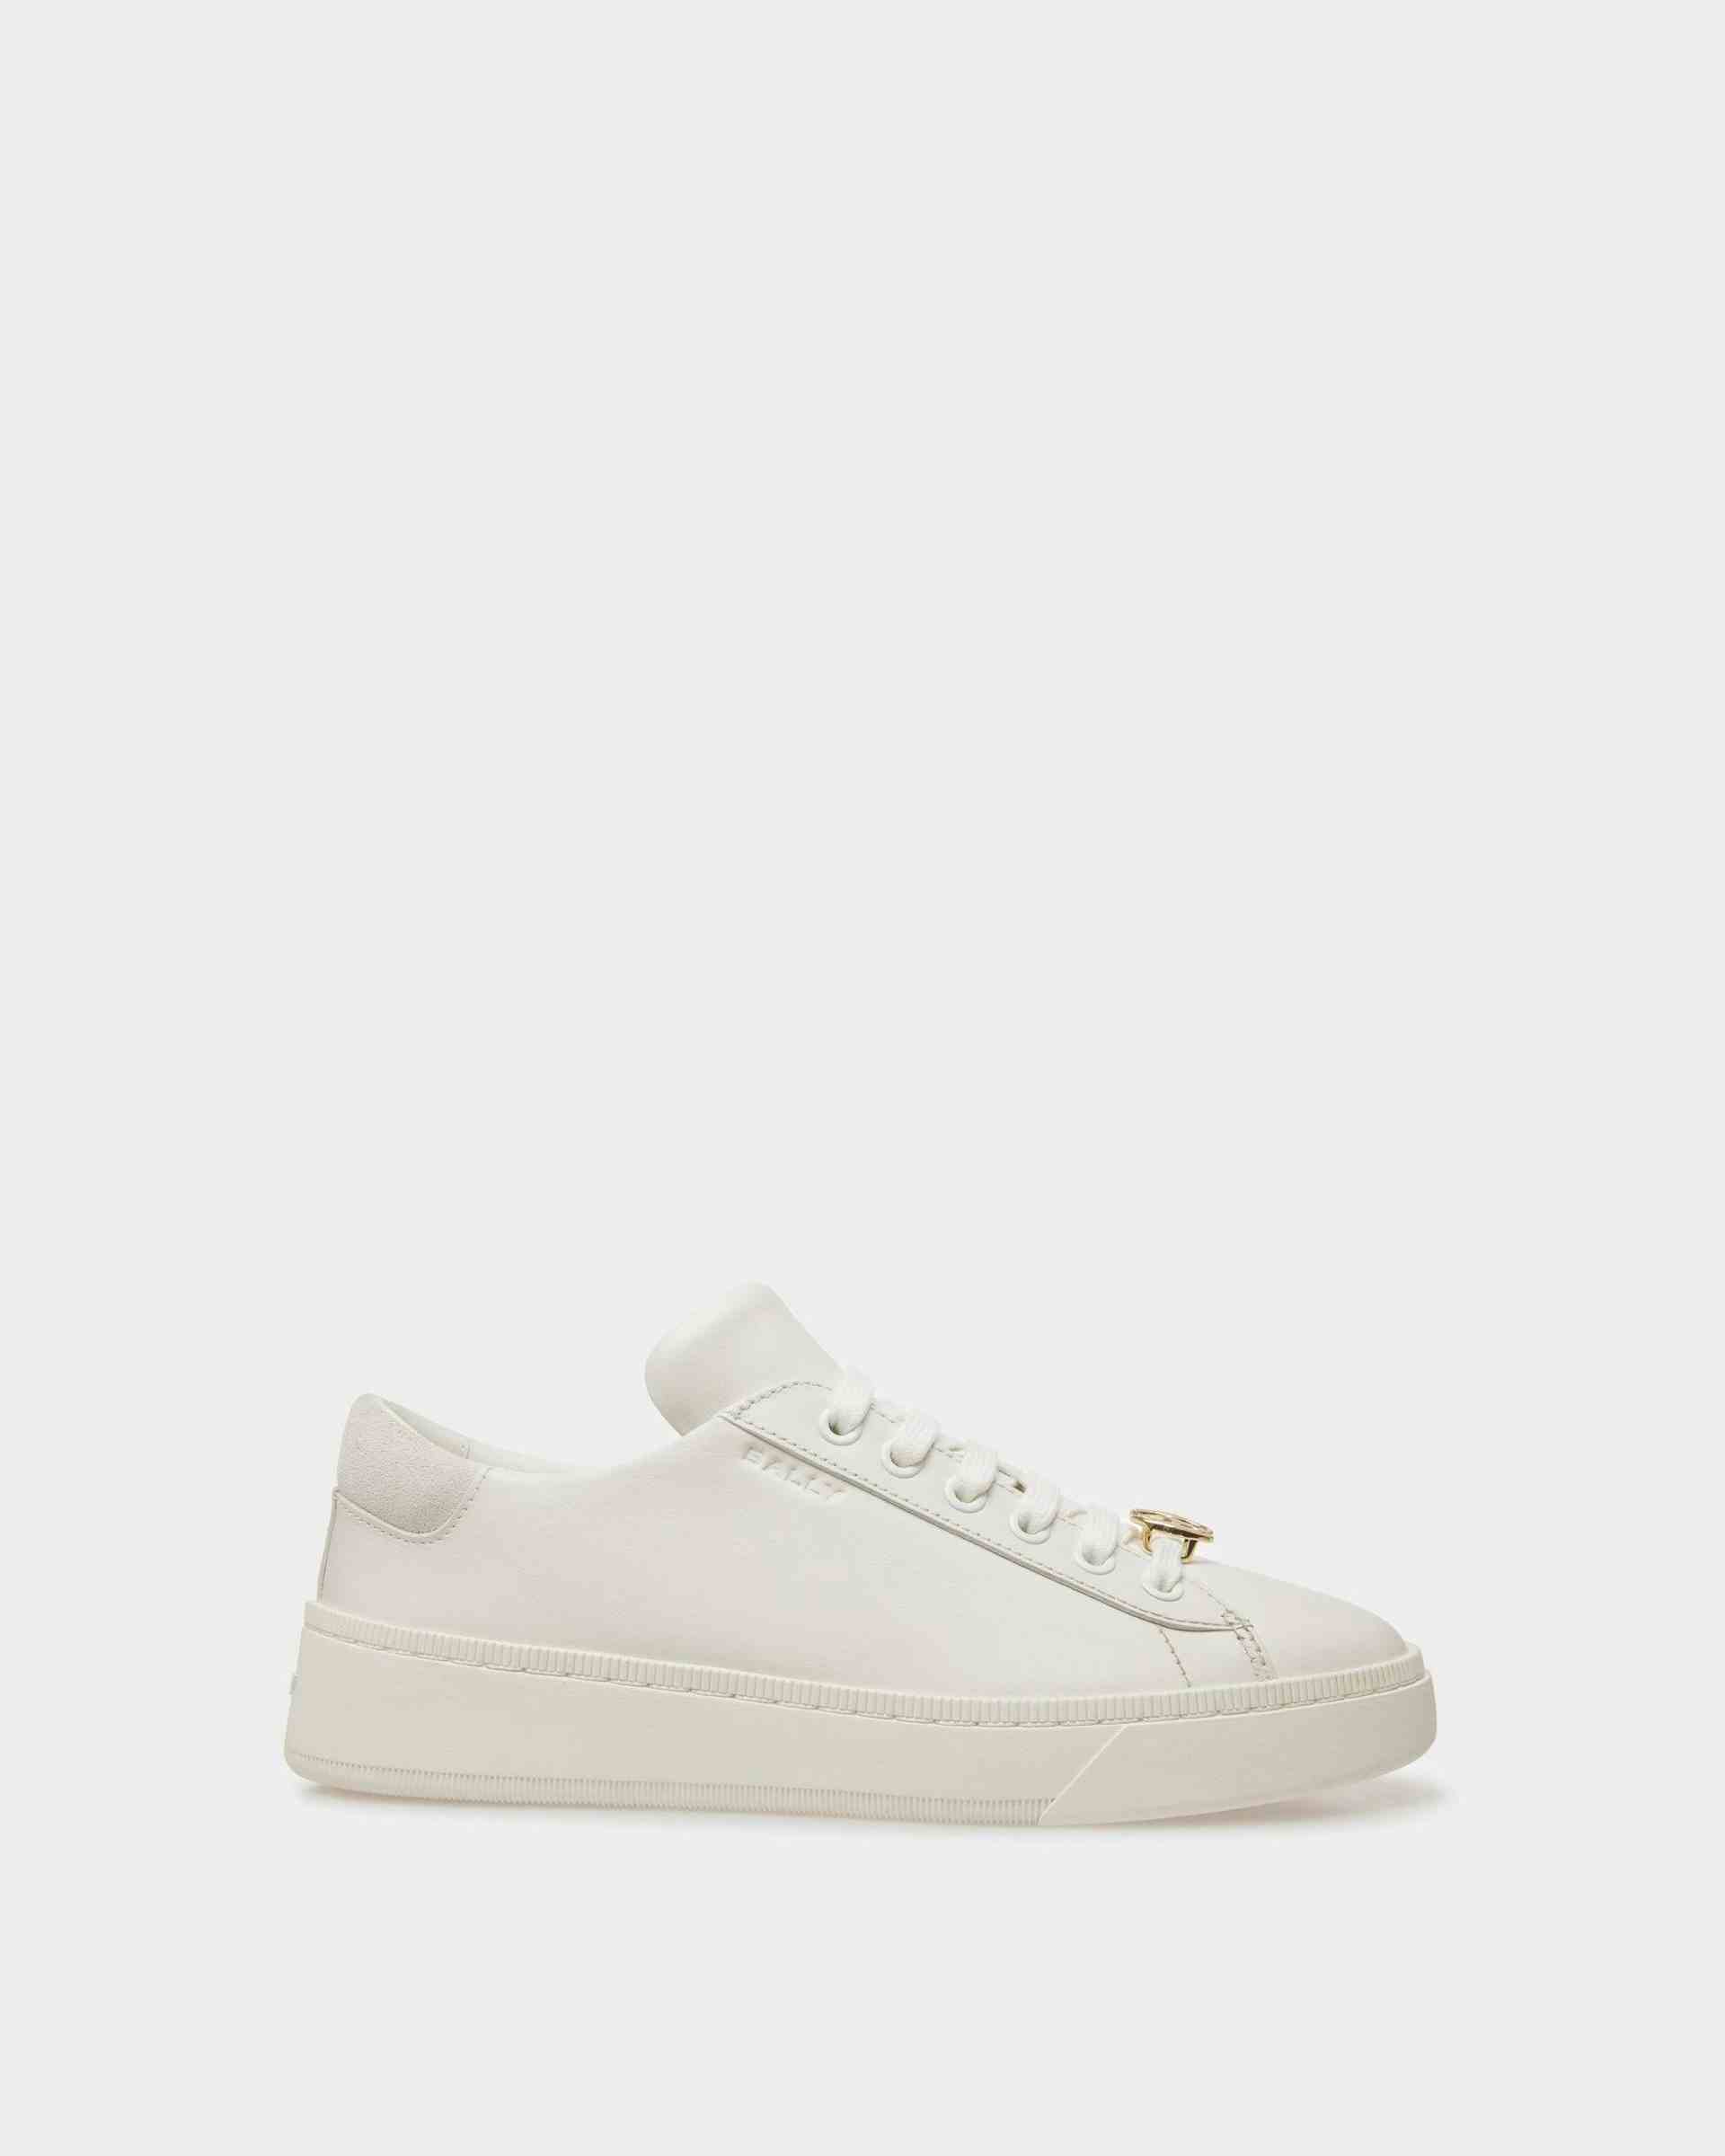 Raise Sneakers In White Leather - Women's - Bally